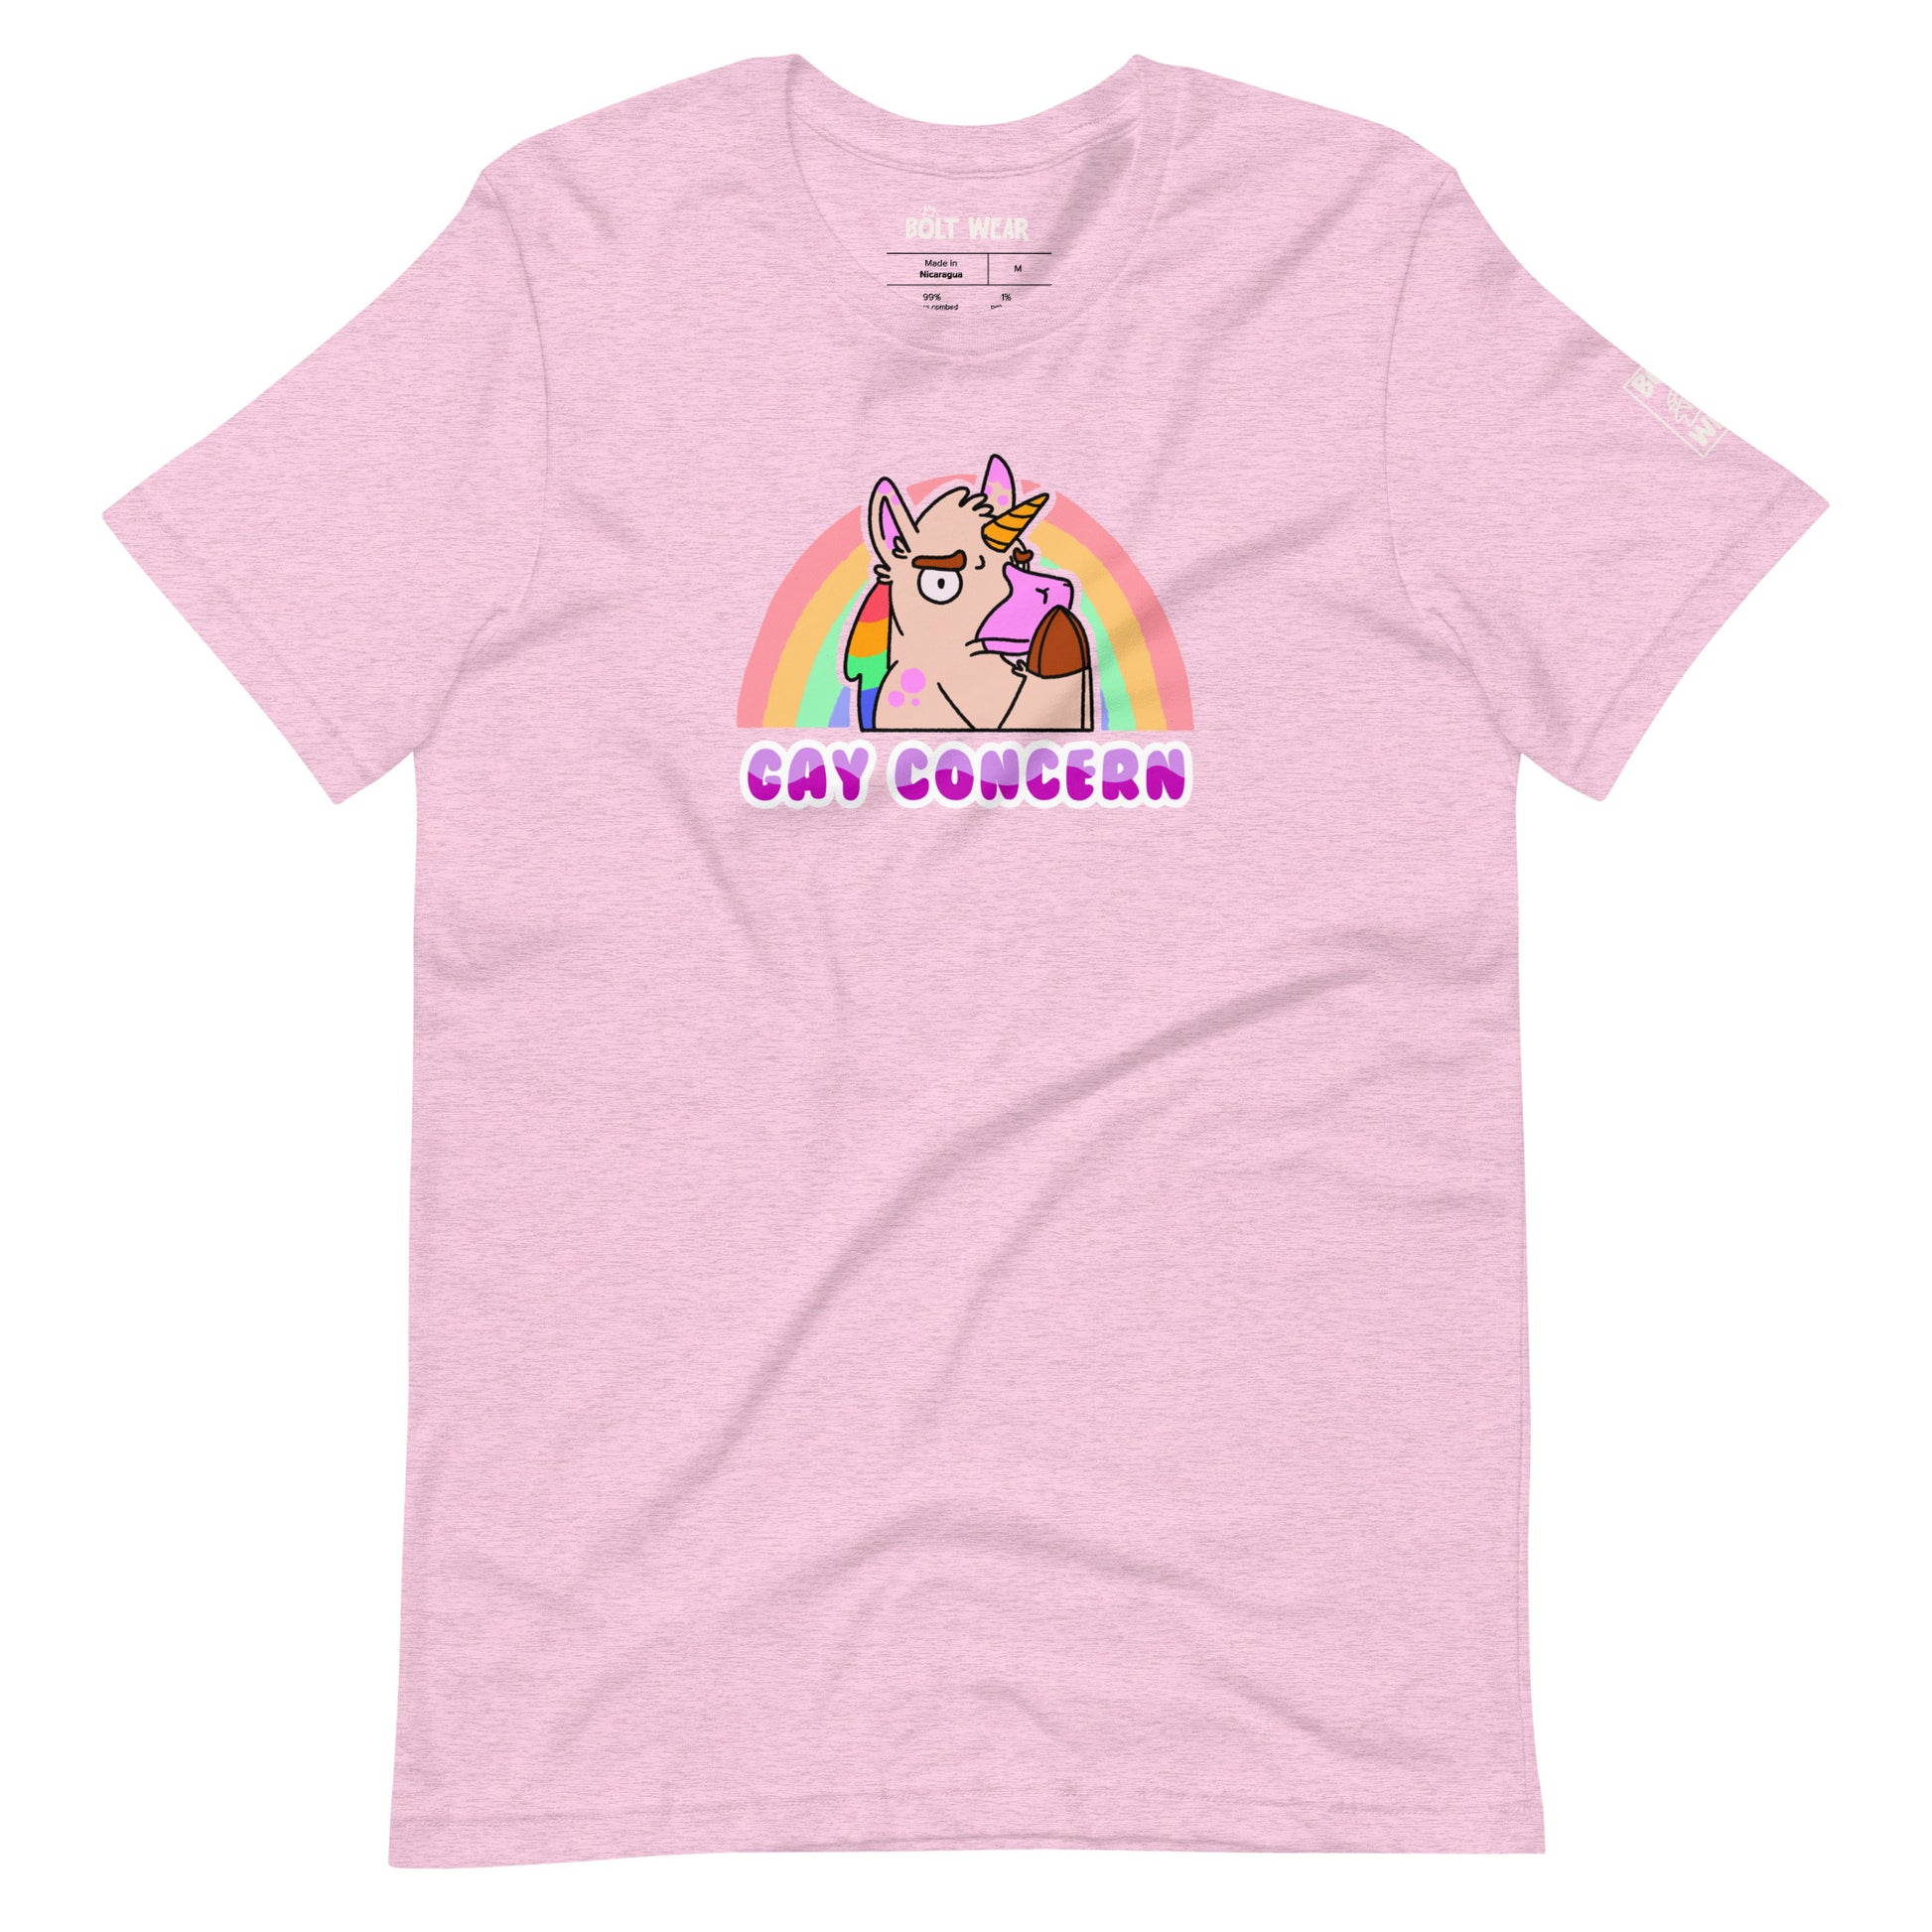 Heather pink Gay Concern t-shirt featuring unicorn in concerned pose with rainbow behind.